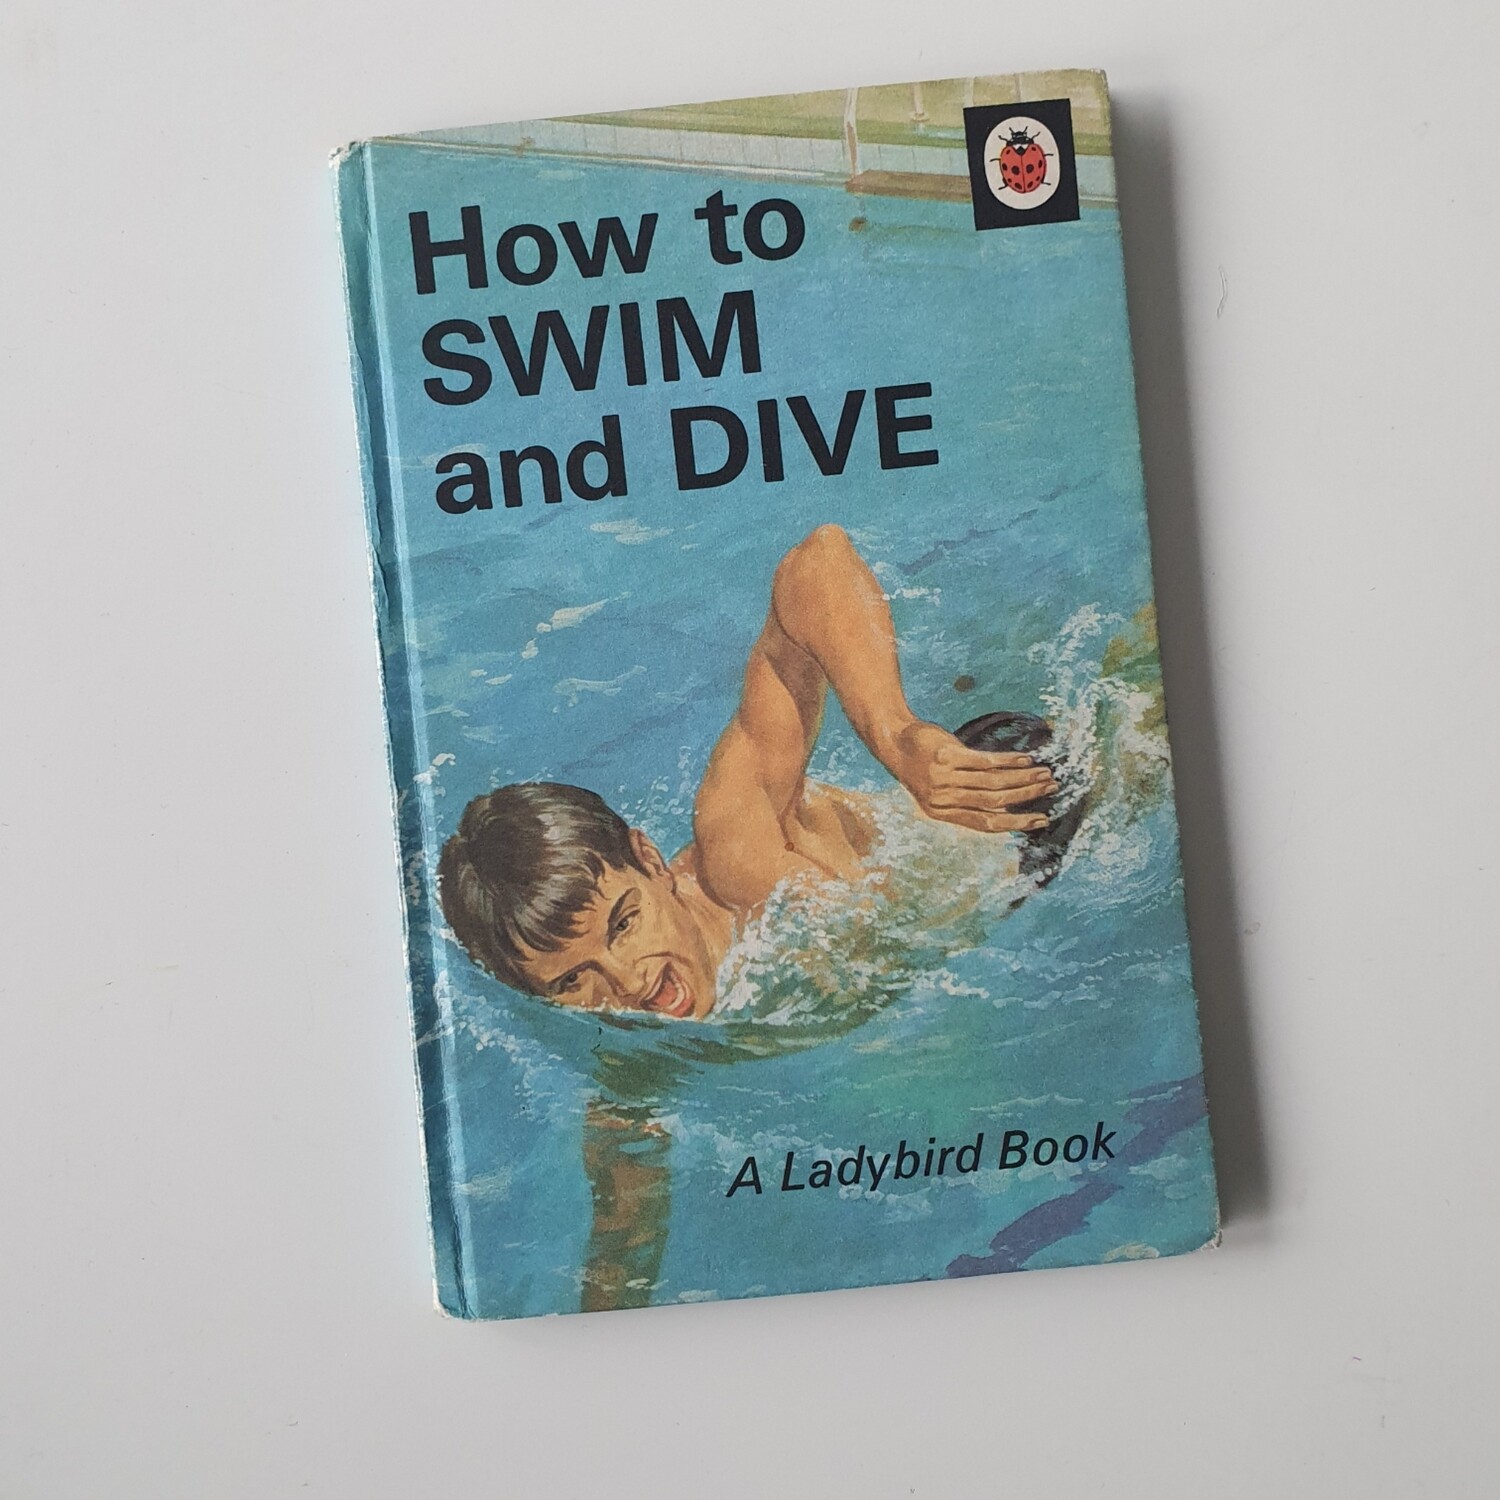 How to Swim and Dive Notebook - Ladybird book